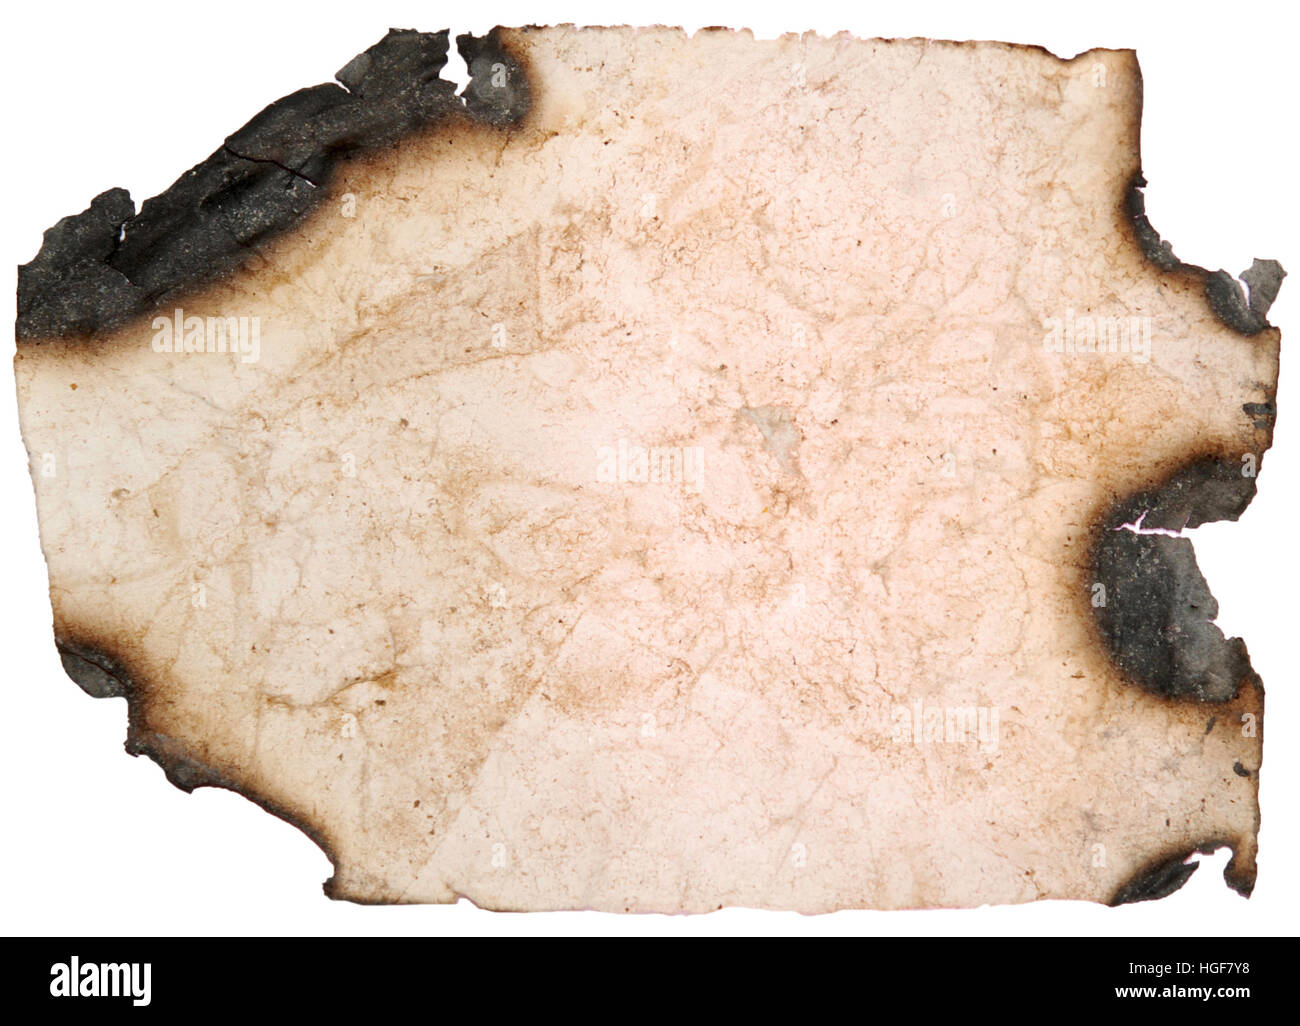 Aged Paper Background stock image. Image of stained, burned - 7917241